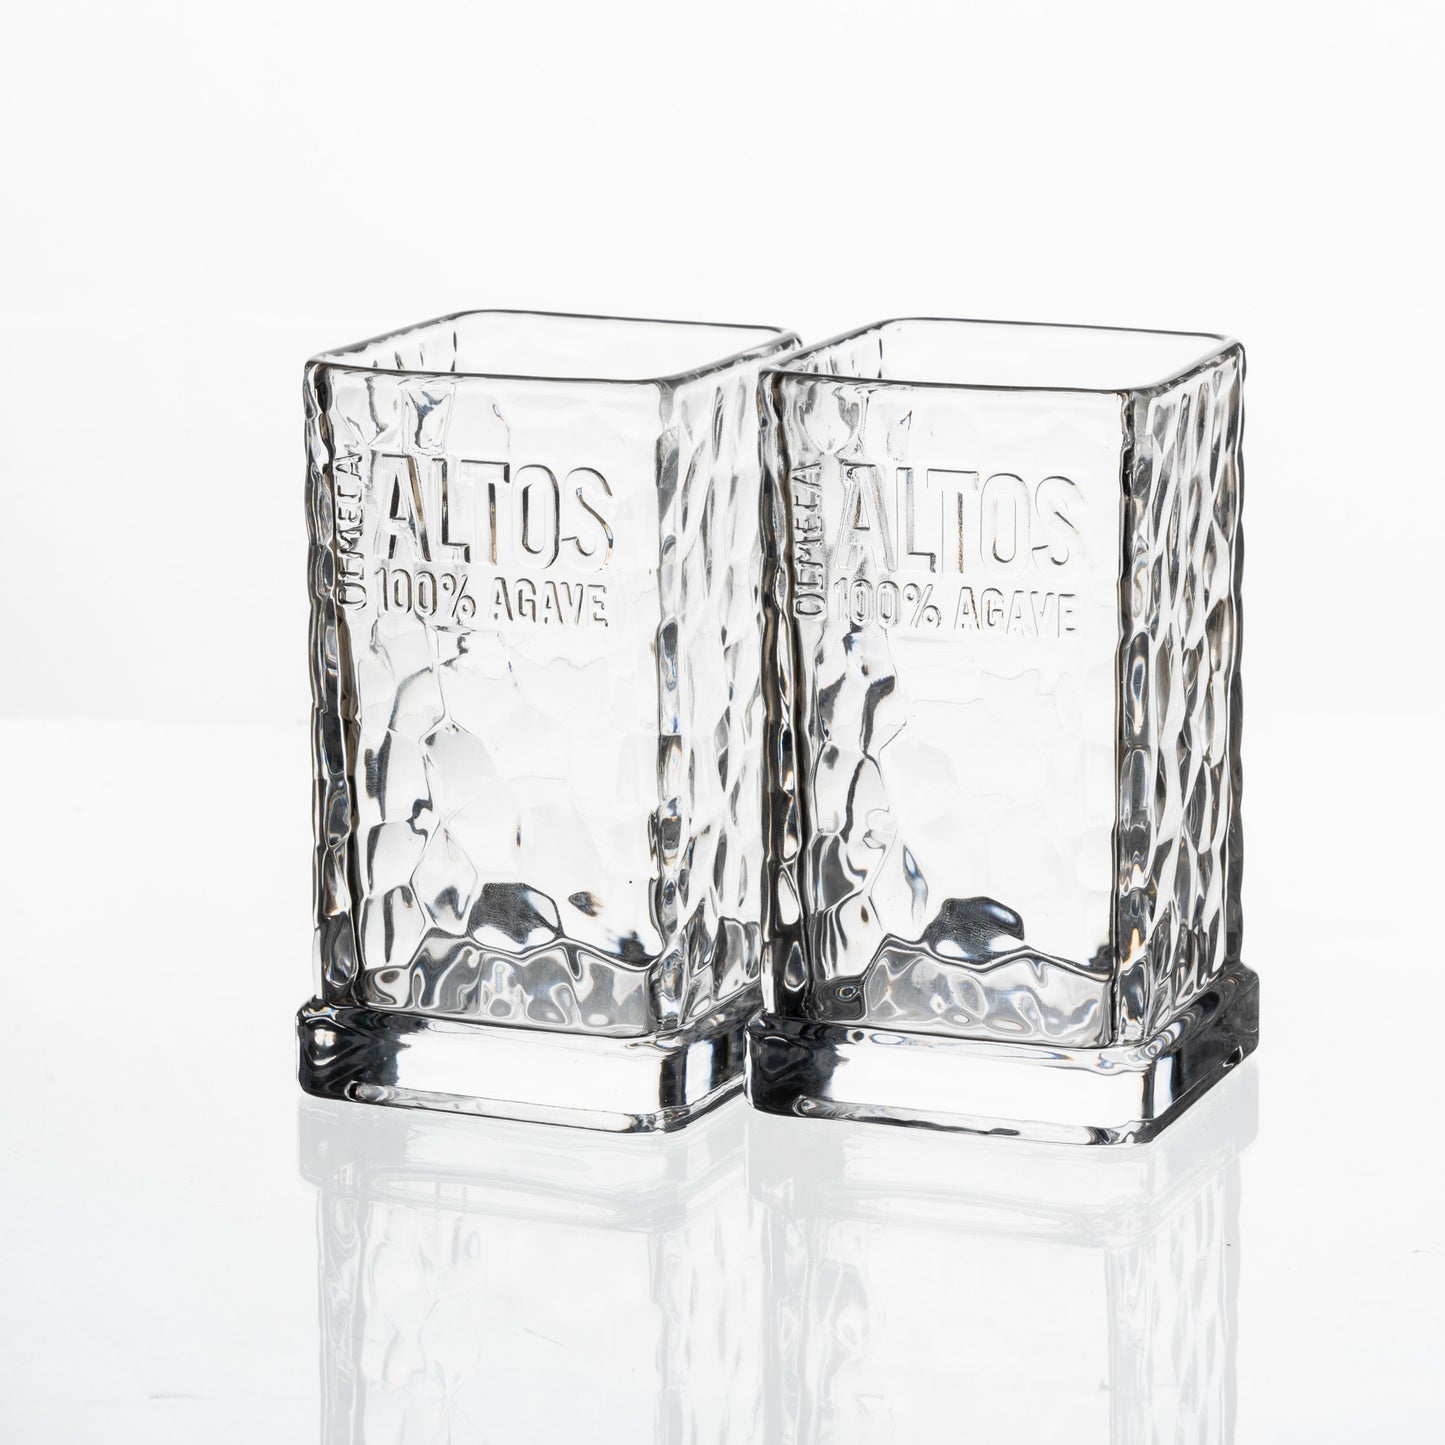 Altos Tequila Glasses for Sipping